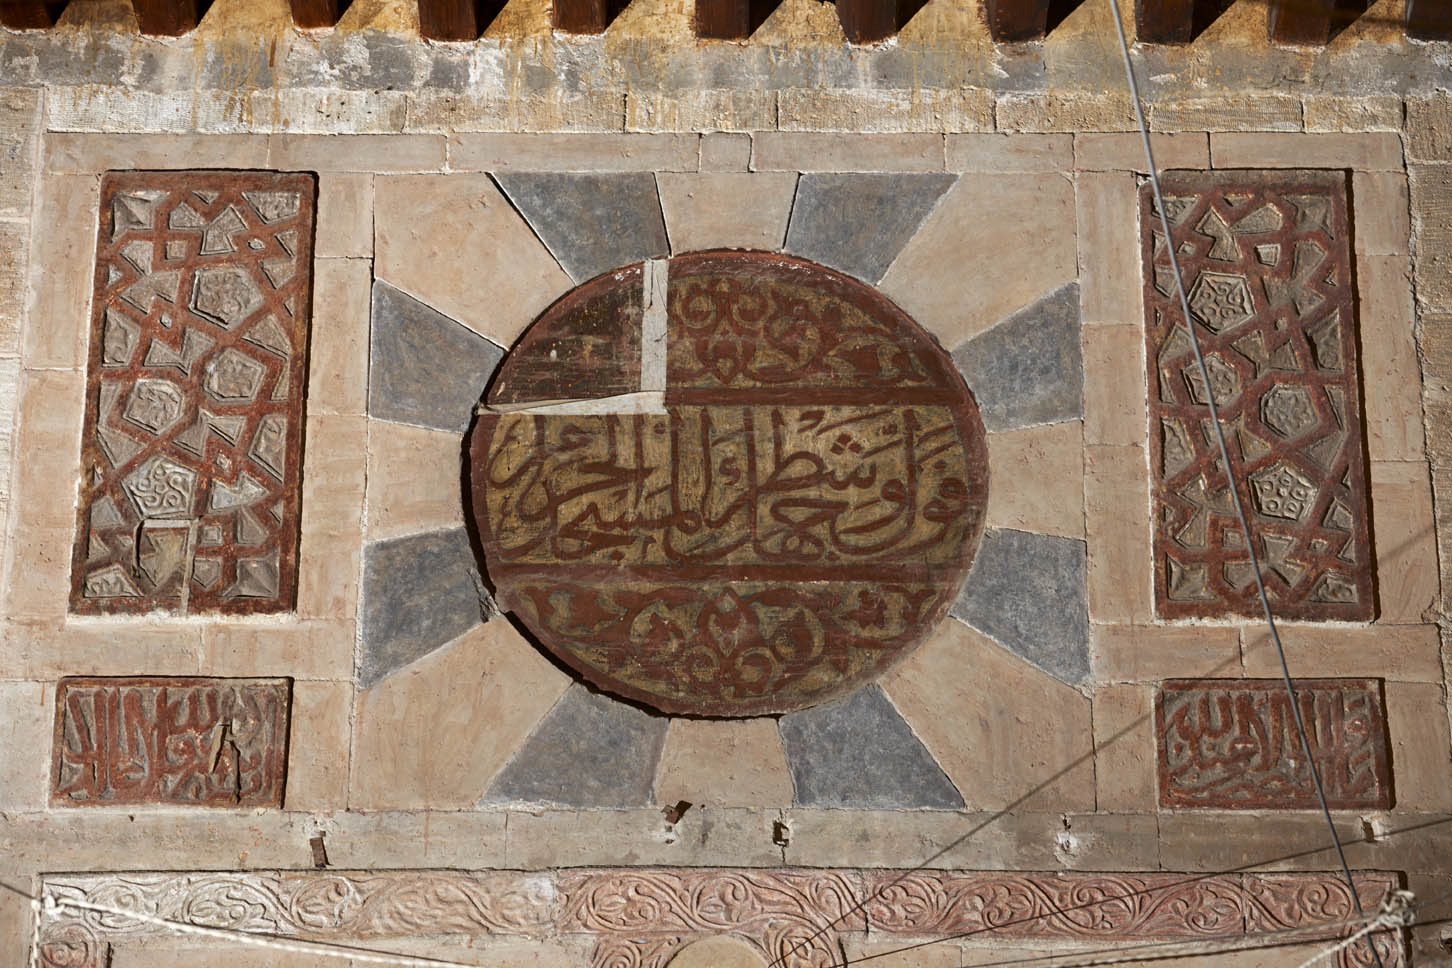 Detail of inscription and ornament above mihrab